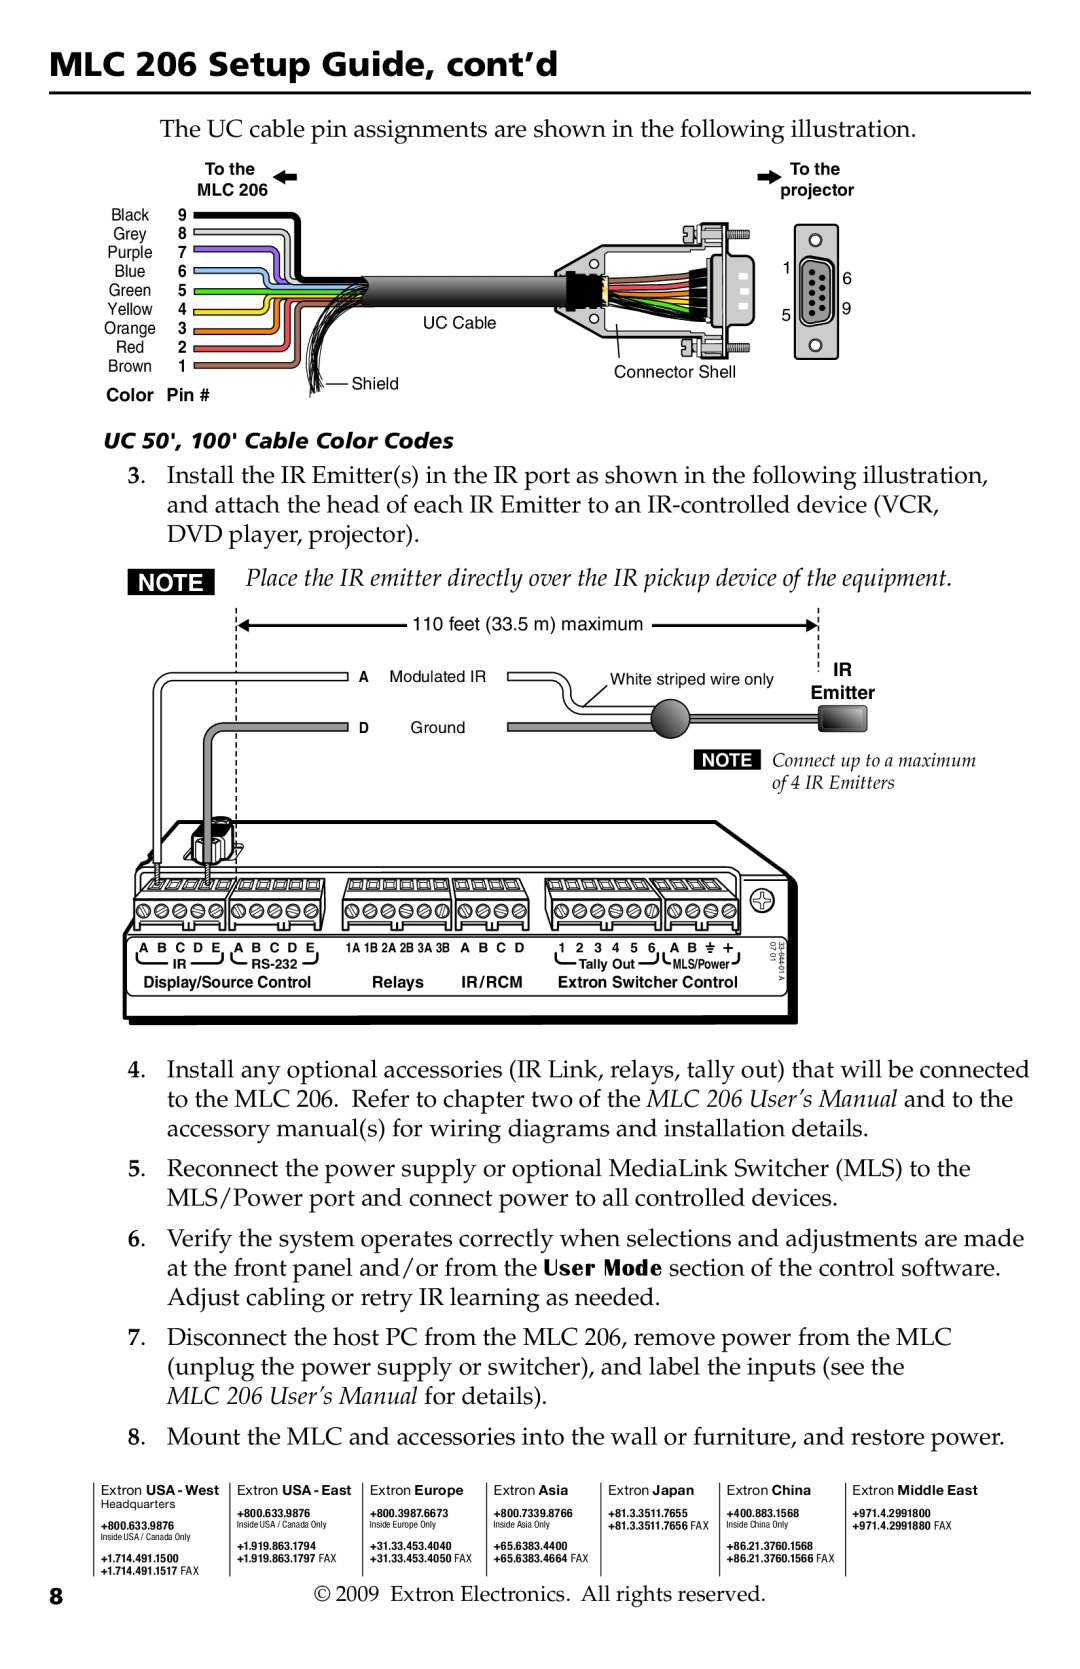 Extron electronic MLC 206 Setup Guide, cont’d, UC 50, 100 Cable Color Codes, Extron Electronics. All rights reserved 